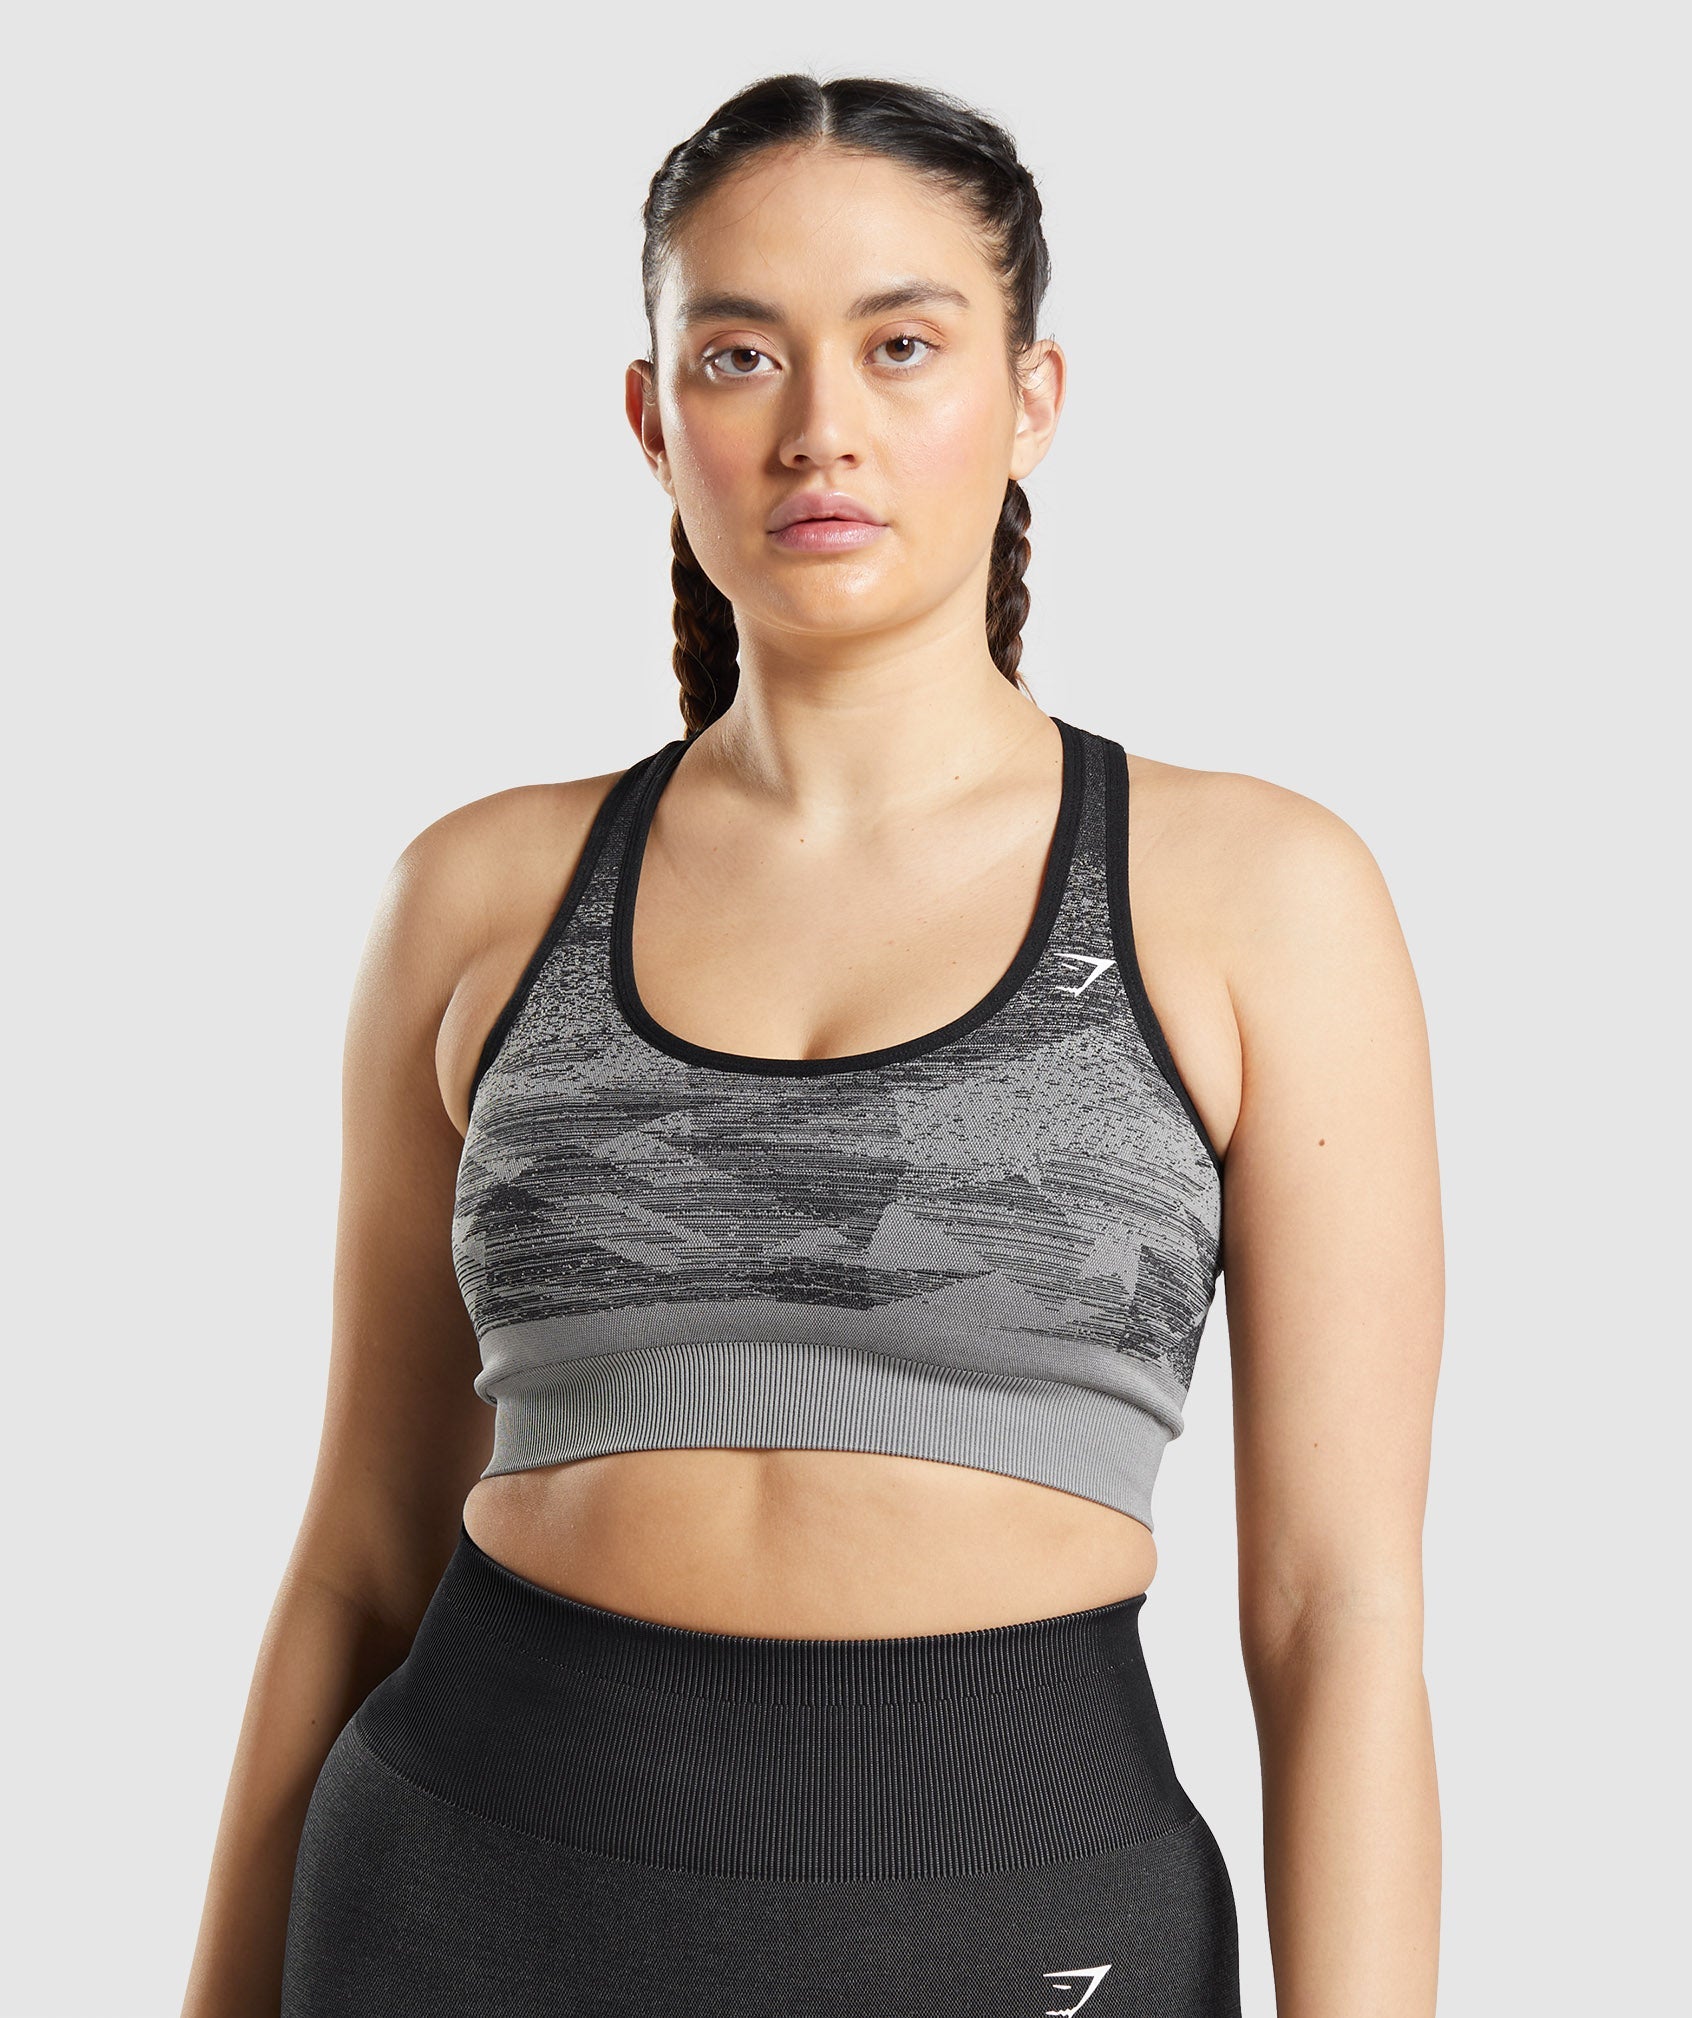 MIXZONES Sports Bras for Women, Medium Support Yoga Gym Activewear Wirefree  Padded TVS Bras 3 Pack (M 30C 32C 32D 34A, Black/White/Grey) at   Women's Clothing store